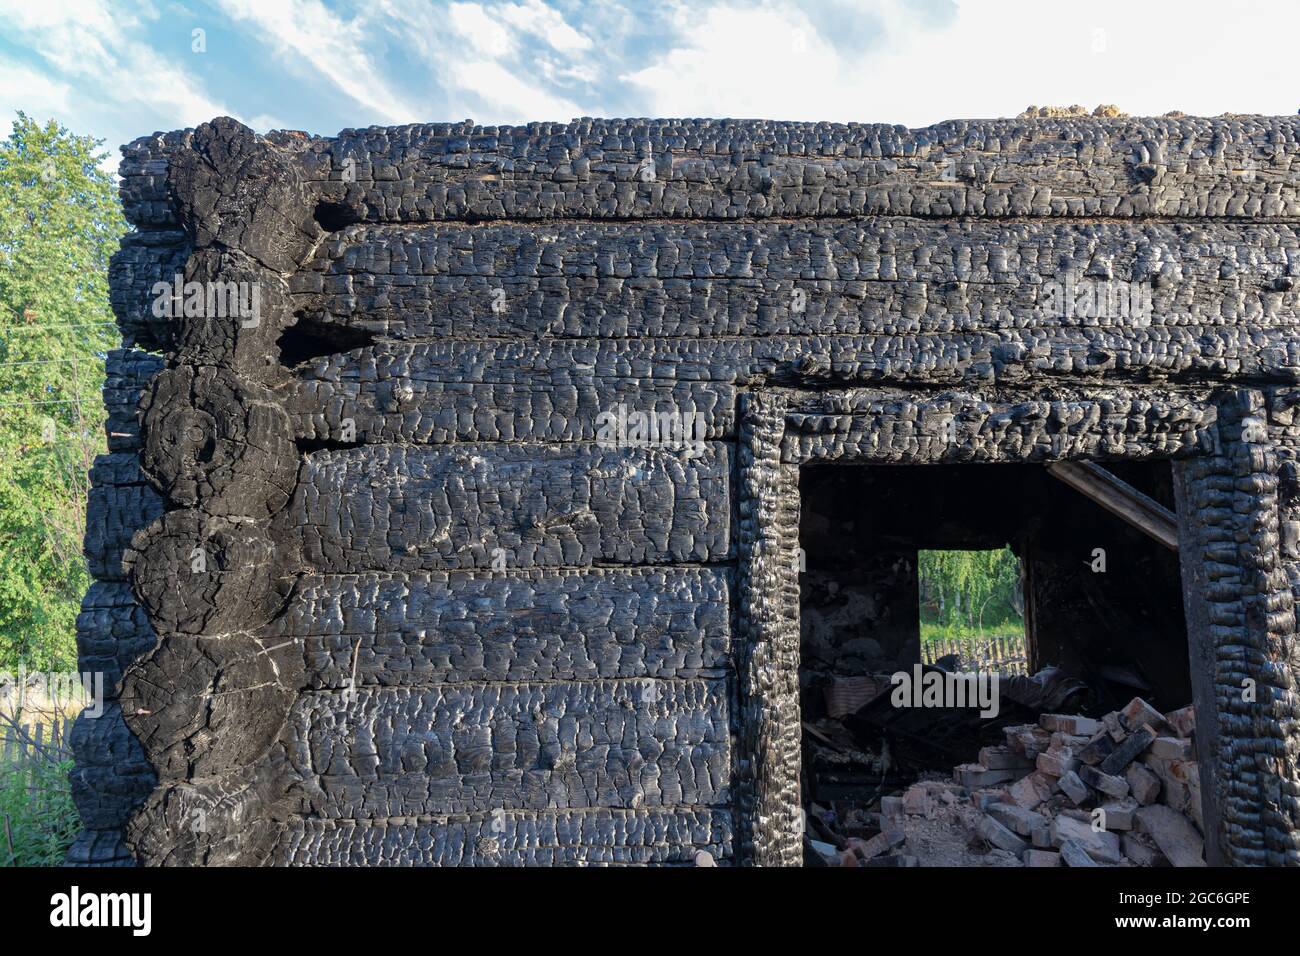 Burnt old log house in the village on a bright summer day against the blue sky. Close-up Stock Photo